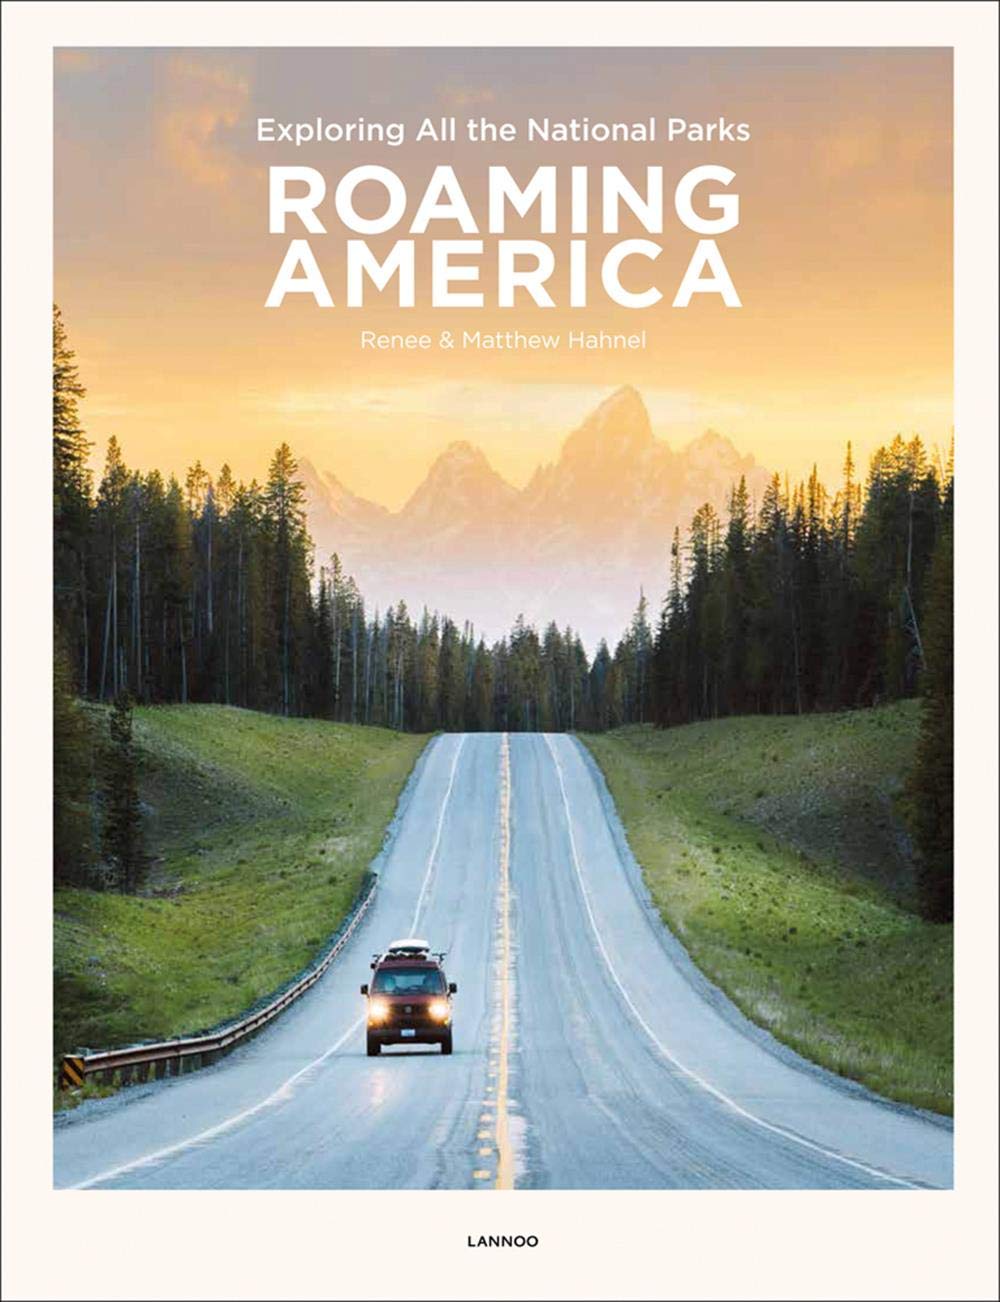 Holiday Gift Guide for National Park Lovers - Roaming America